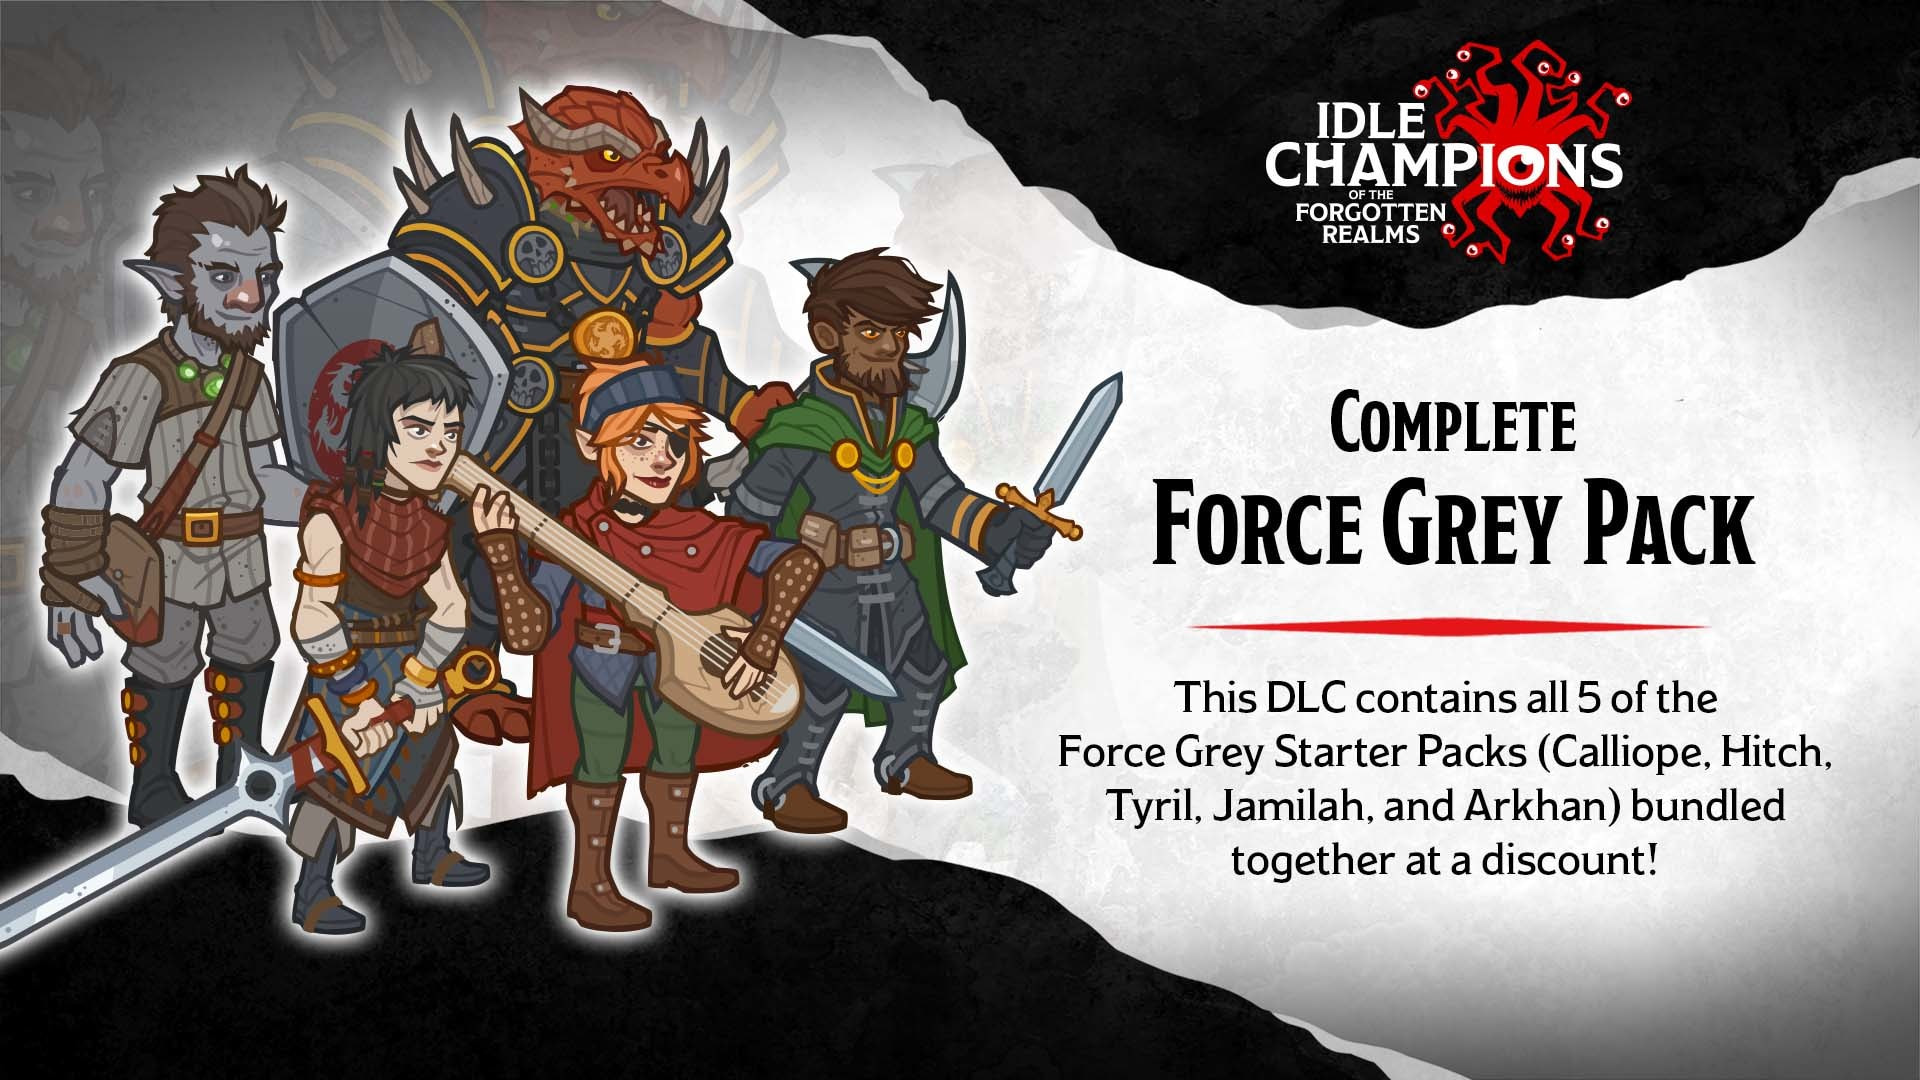 Idle Champions of the Forgotten Realms Redeem Codes